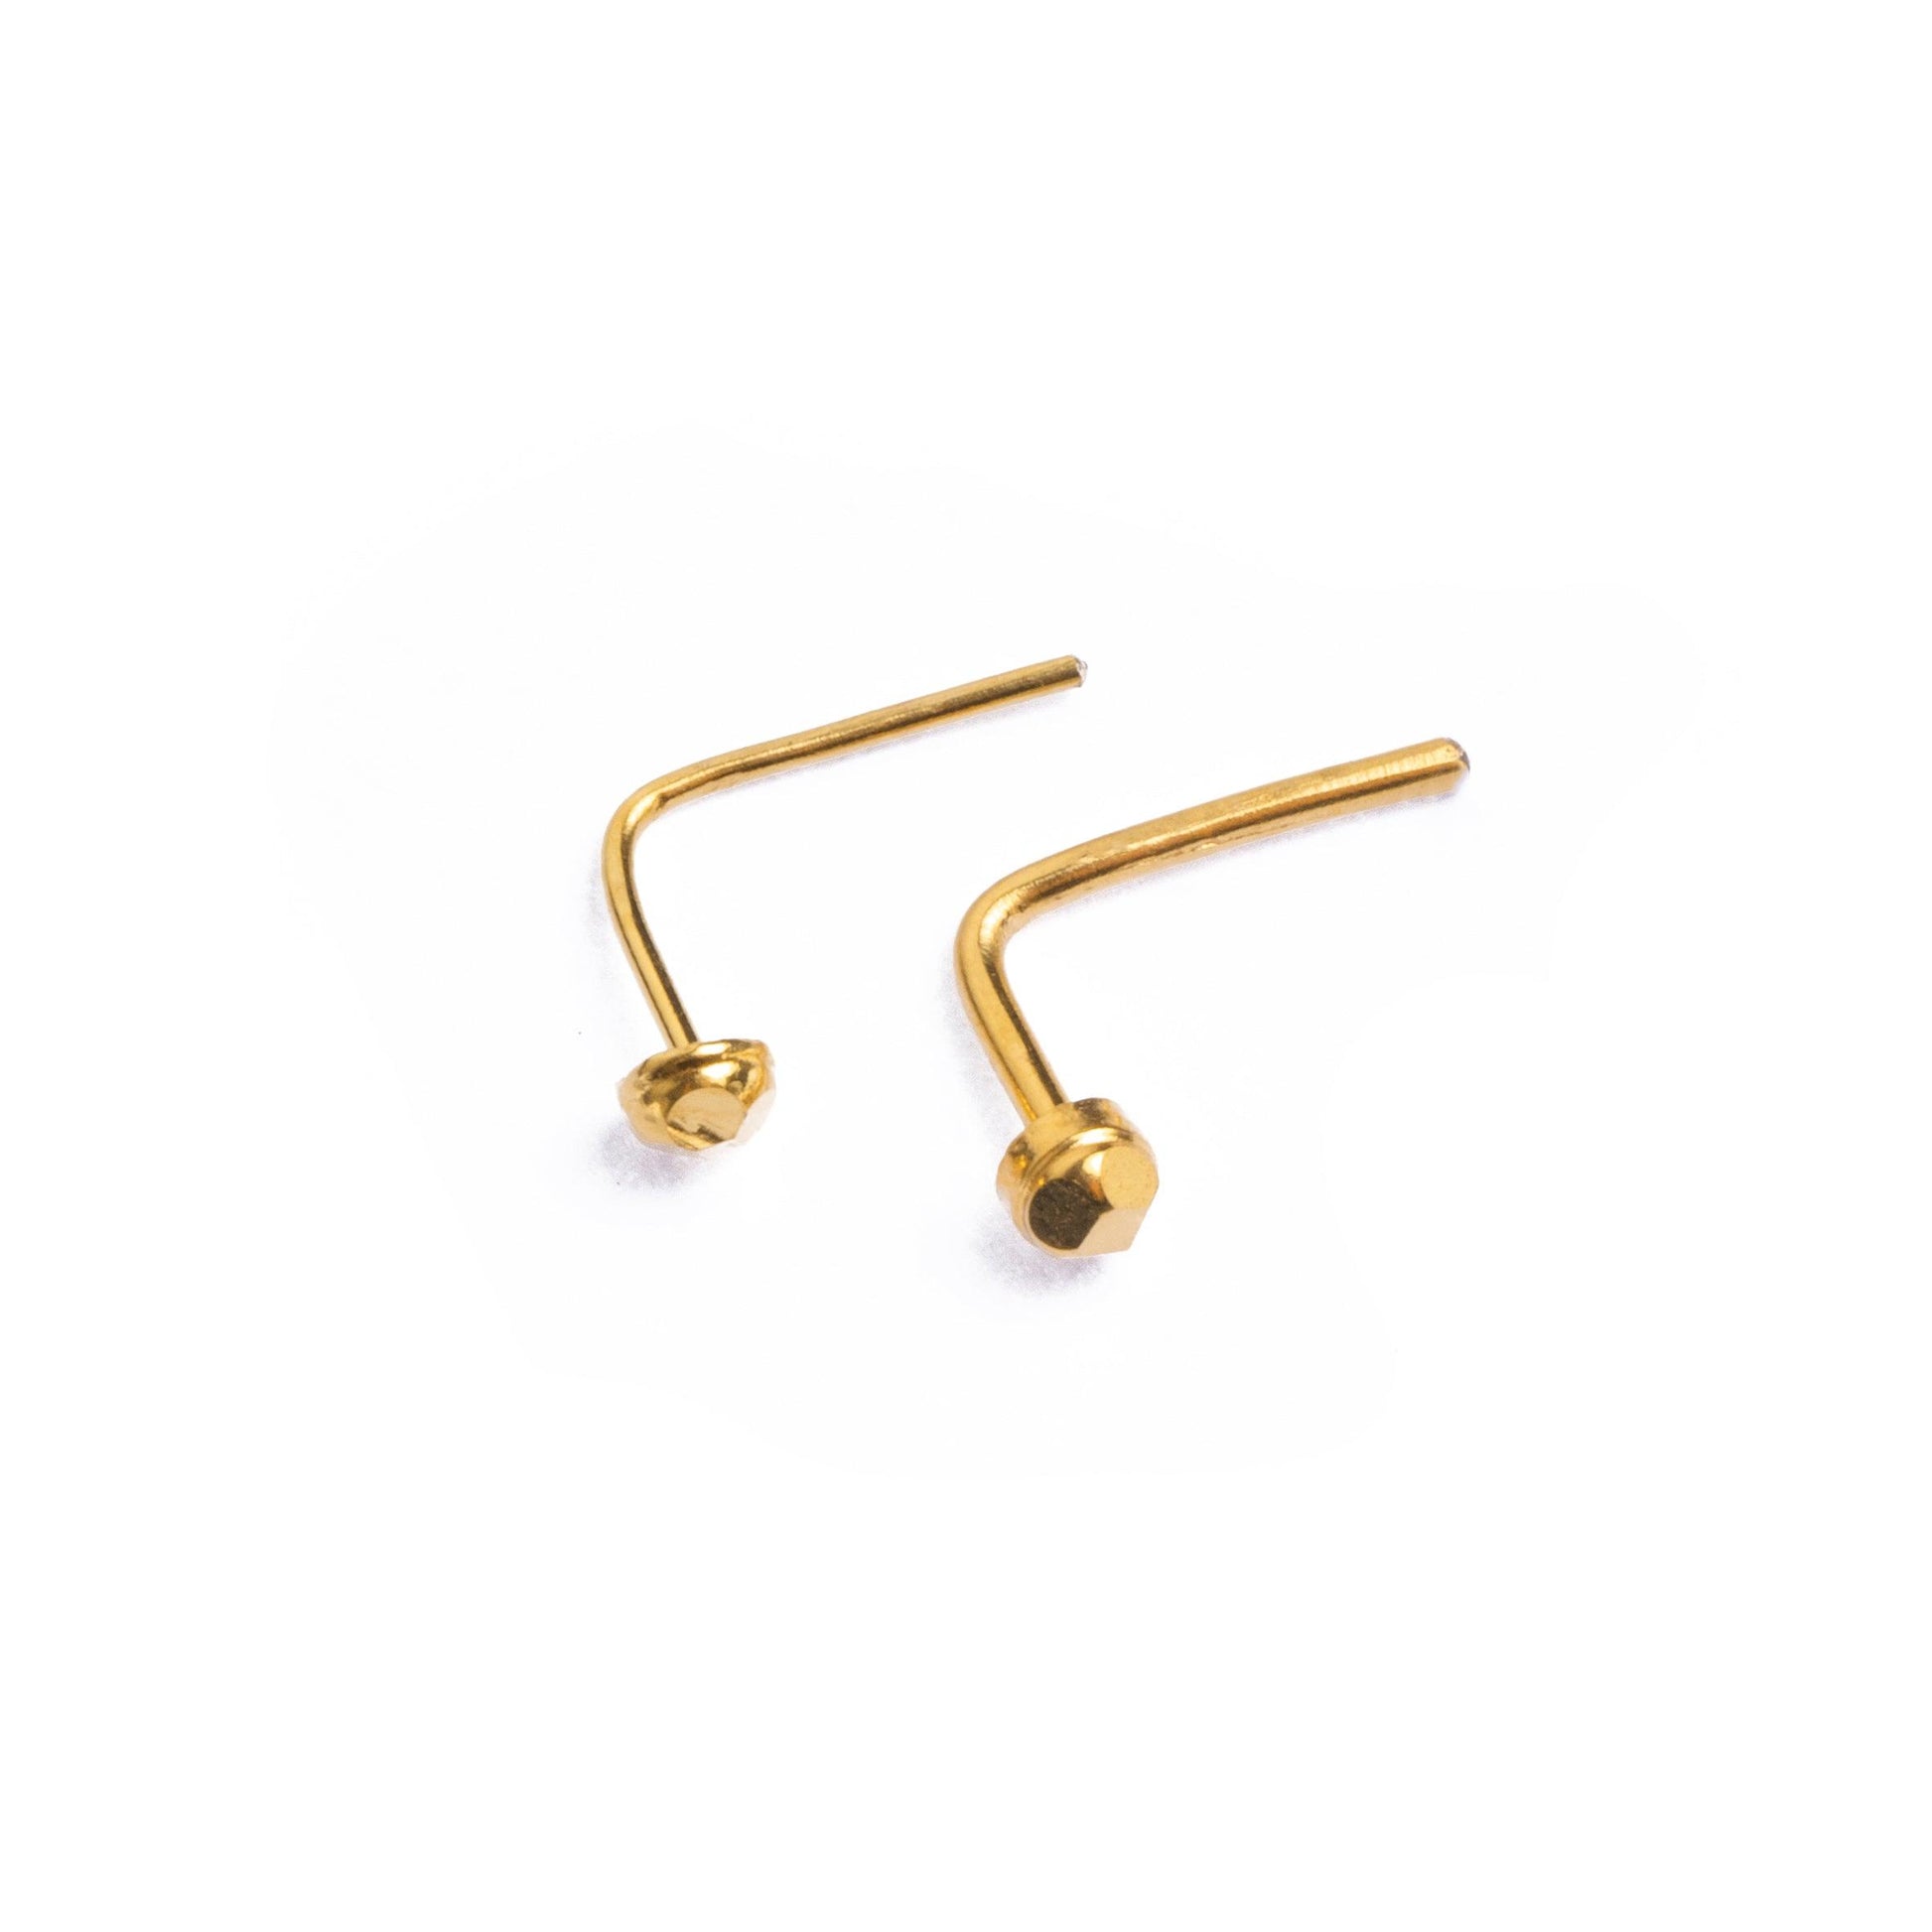 18ct Yellow Gold Nose Stud with L-Shape Back NS-2954a - Minar Jewellers